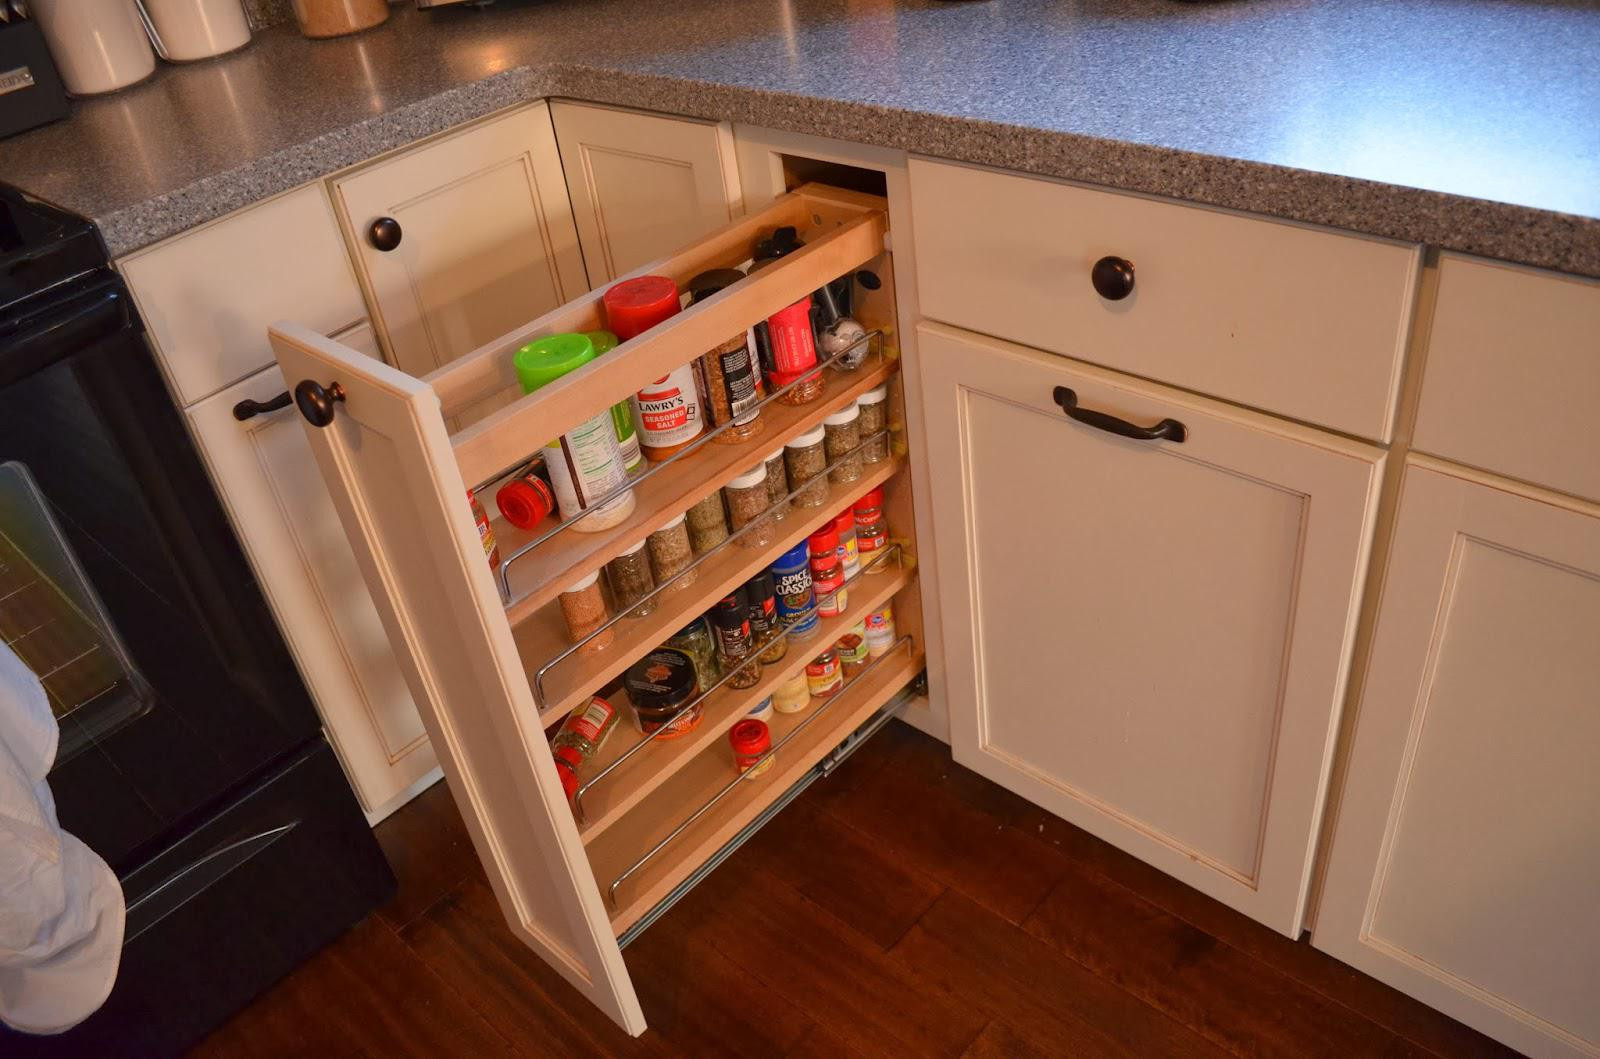 DIY Pull Out Spice Rack
 DIY Pull Out Spice Rack — Home Inspirations DIY Pull Out